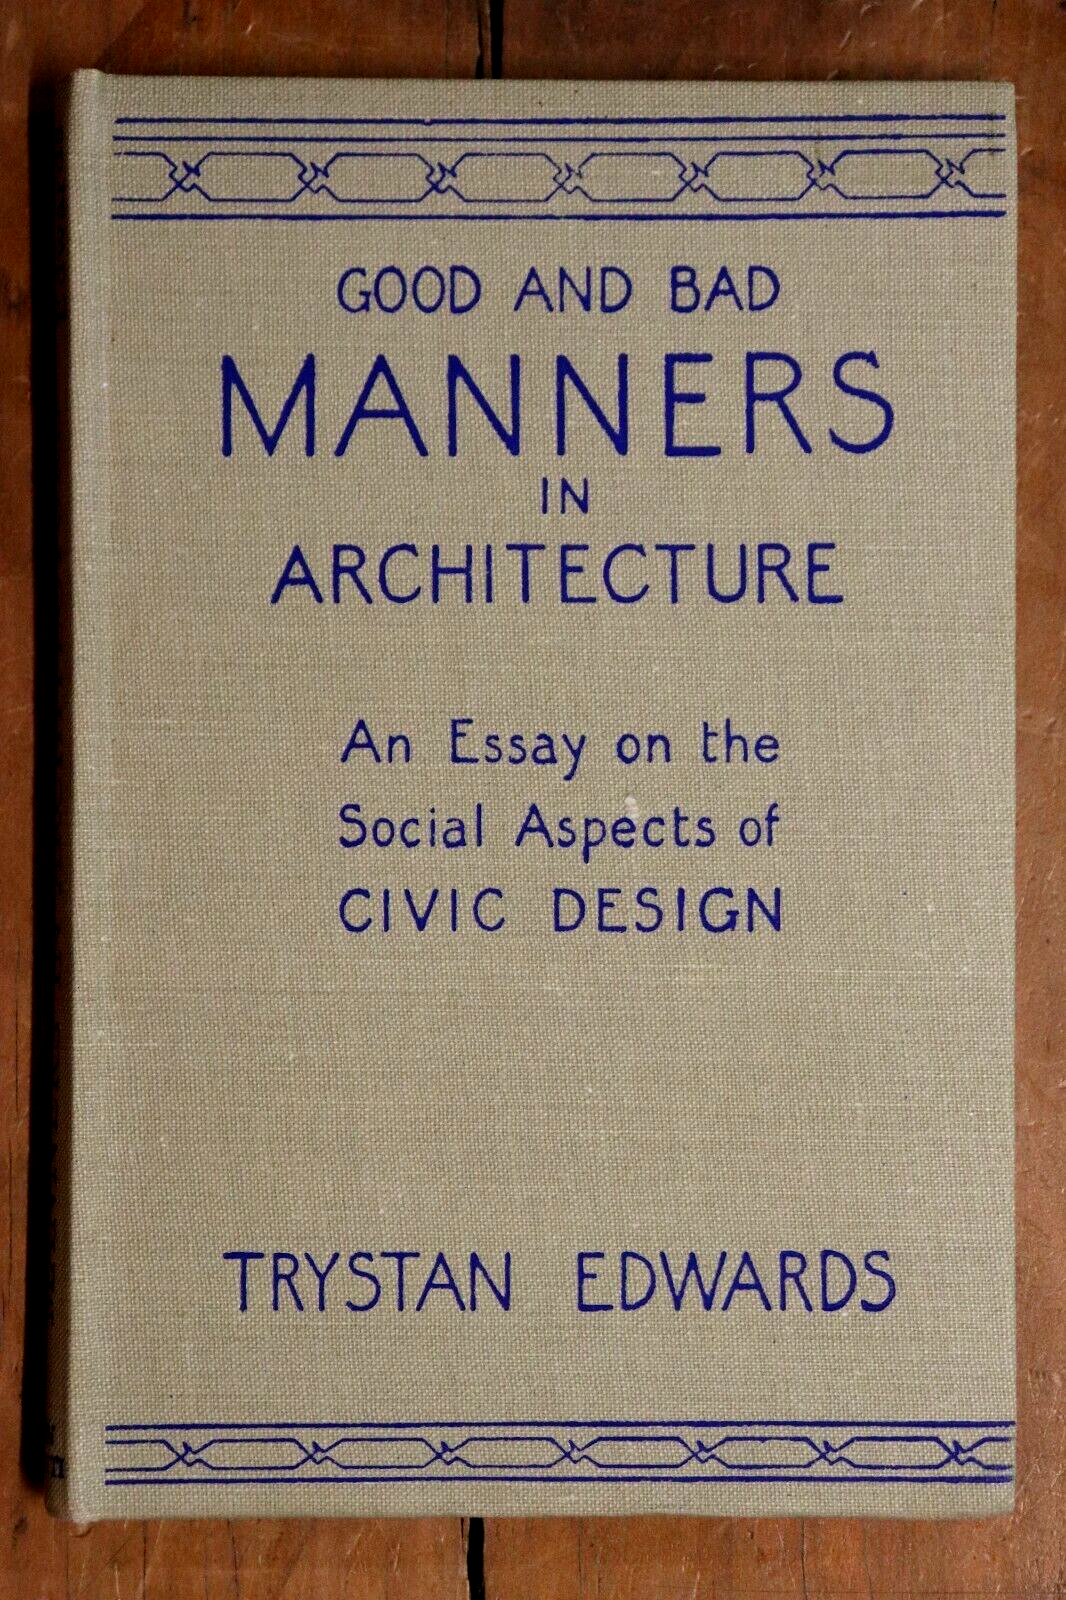 Good & Bad Manners In Architecture - 1945 - Hardcover Architectural Book